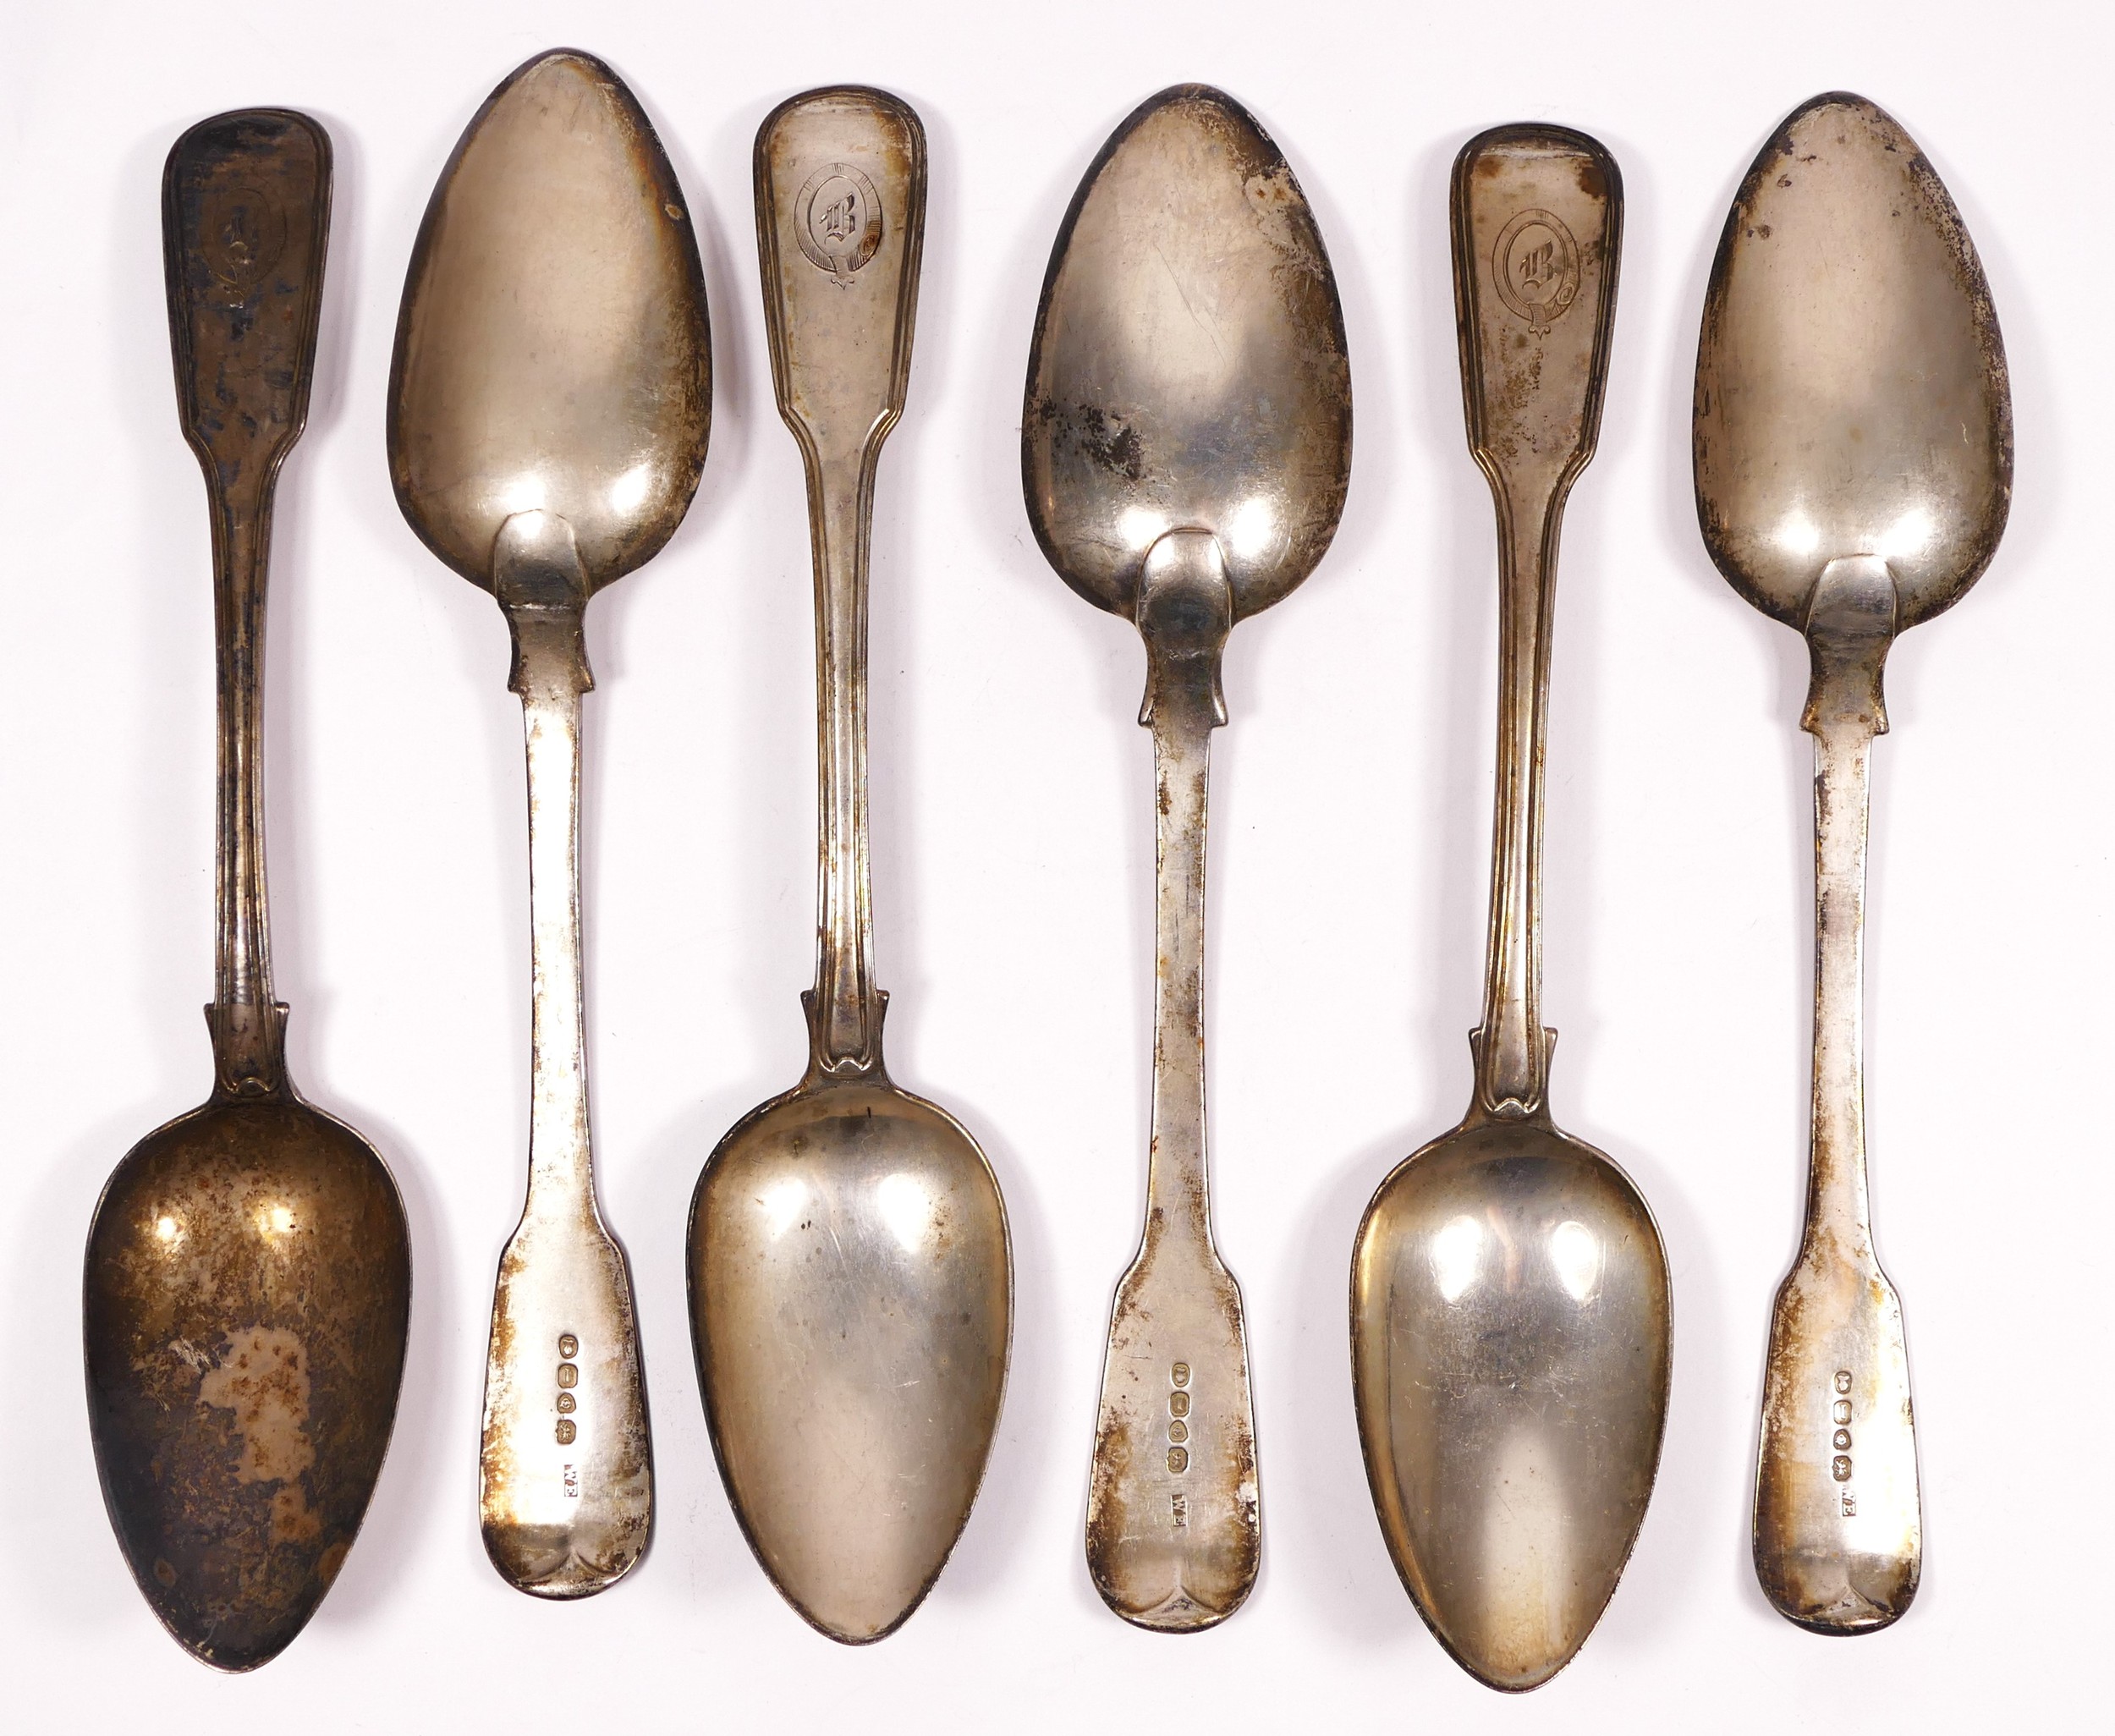 A George IV silver set of six fiddle and thread pattern table spoons, by William Eley, London